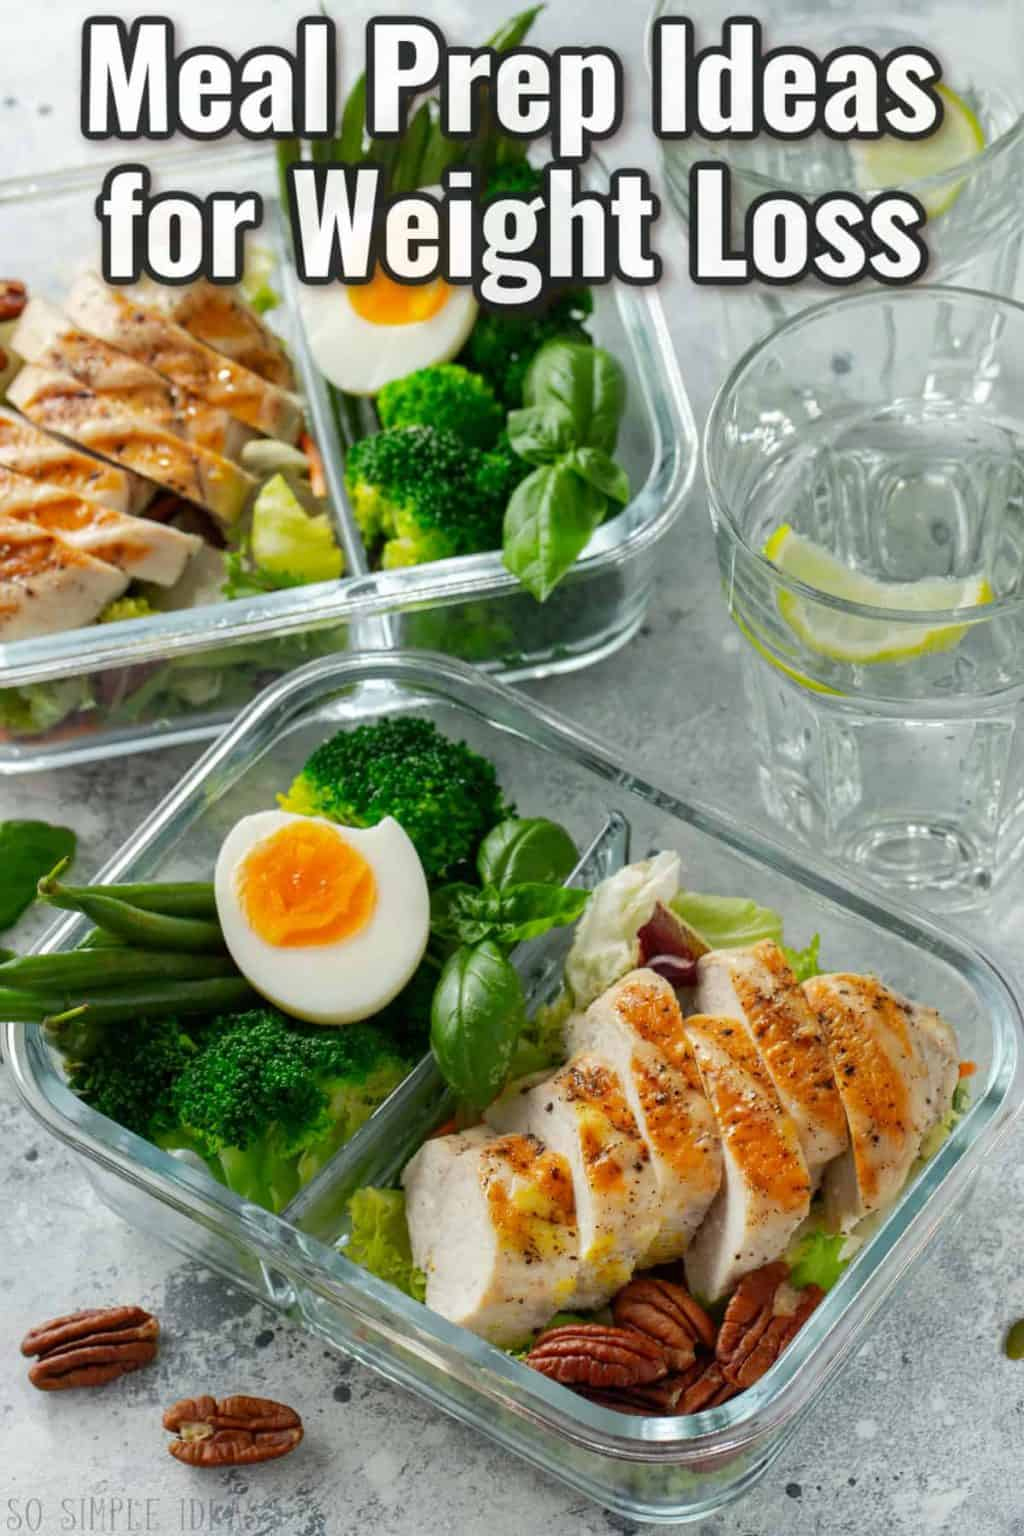 10 Healthy Meal Prep Ideas For Weight Loss On Keto So 